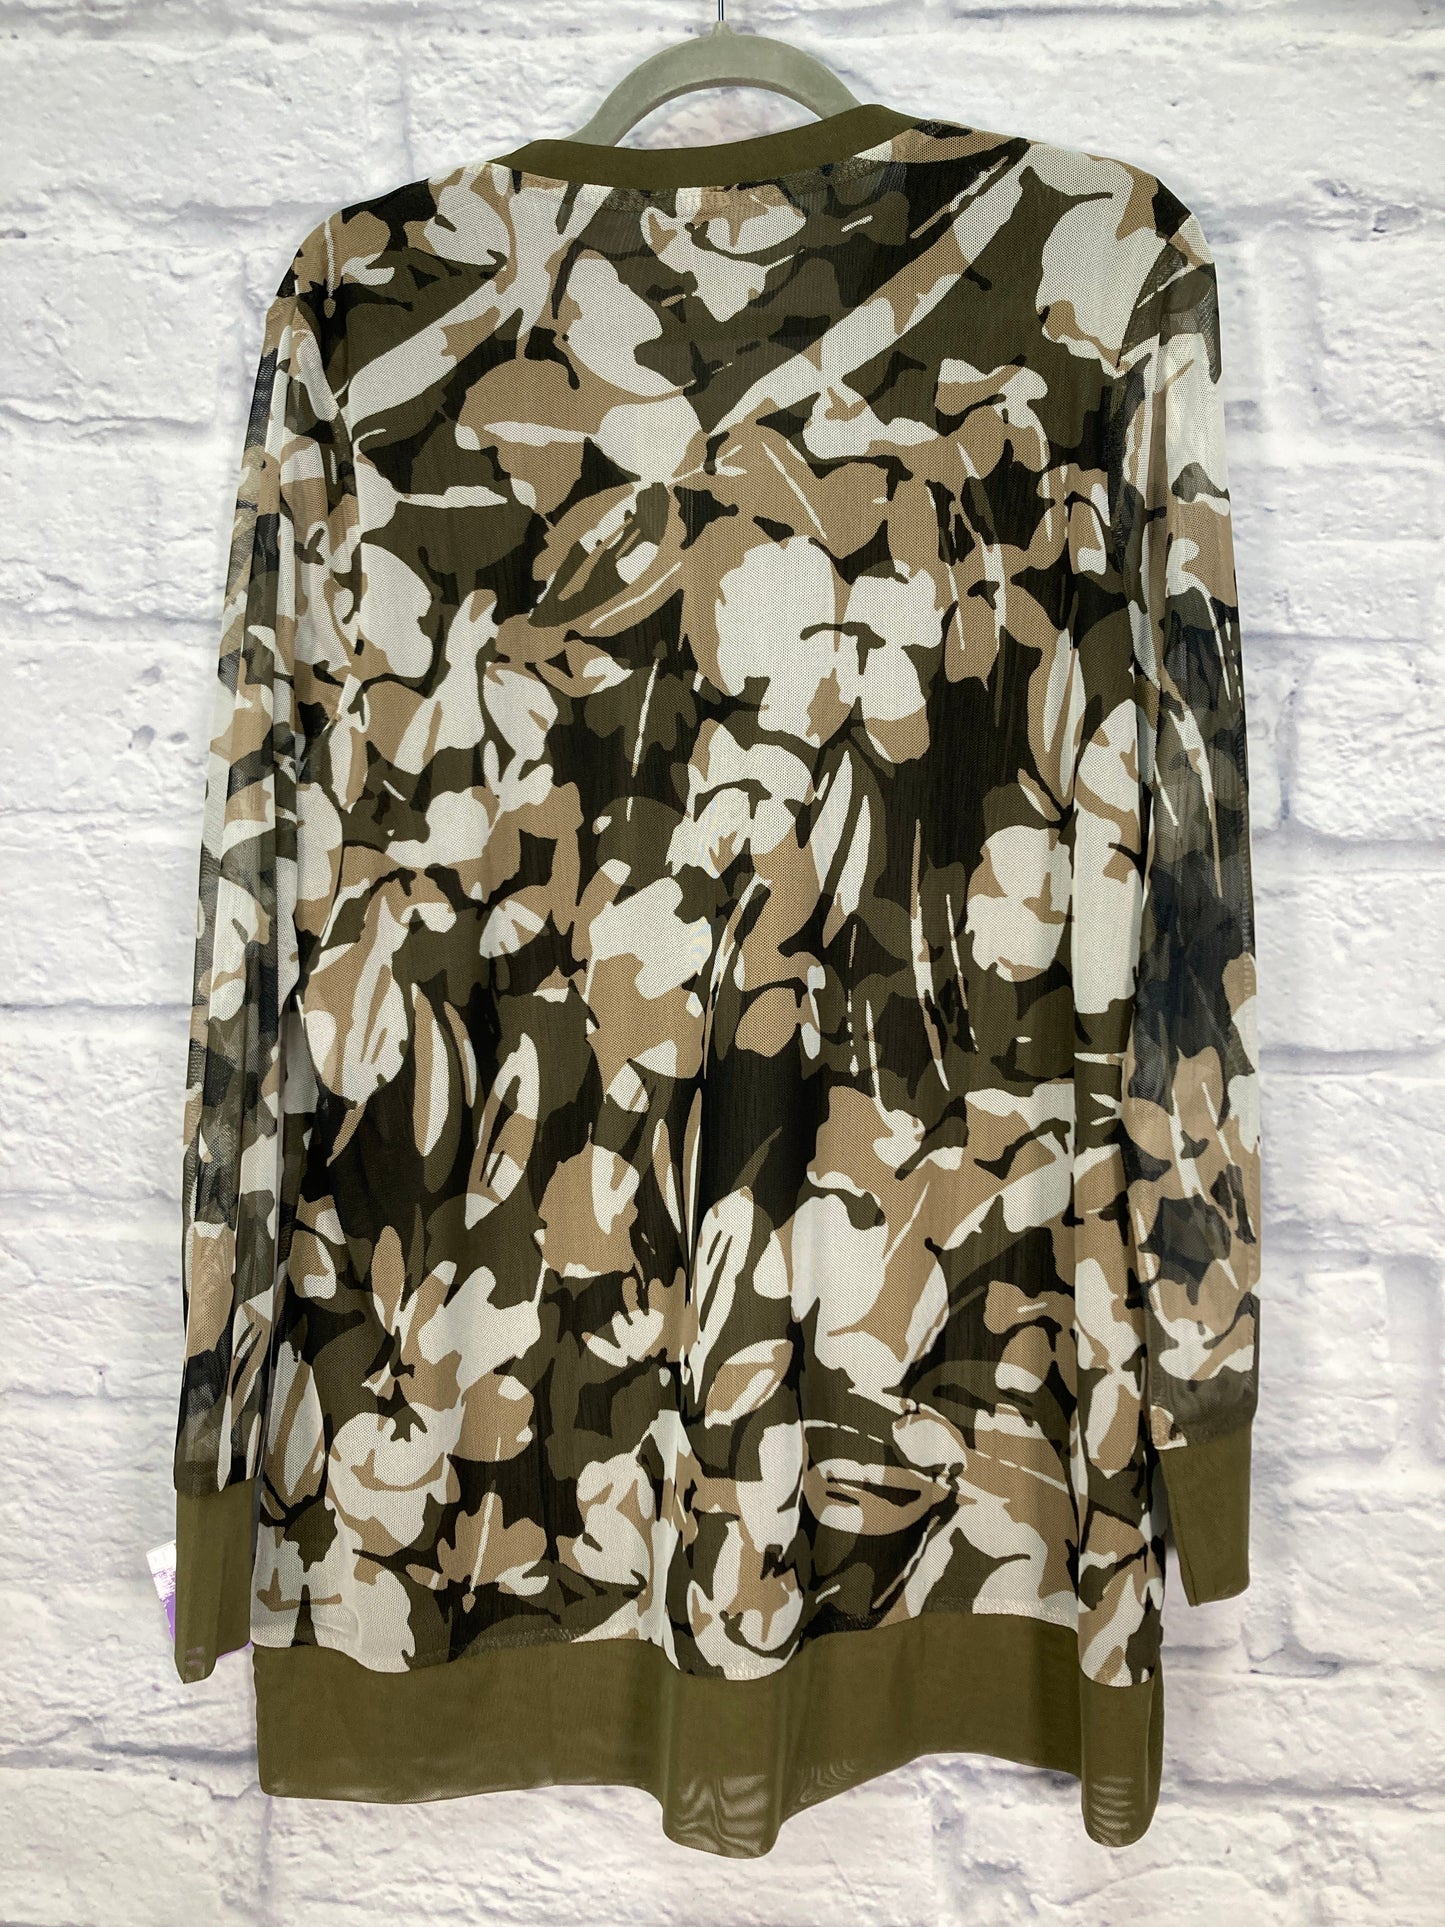 Camouflage Print Top Long Sleeve Chicos, Size L